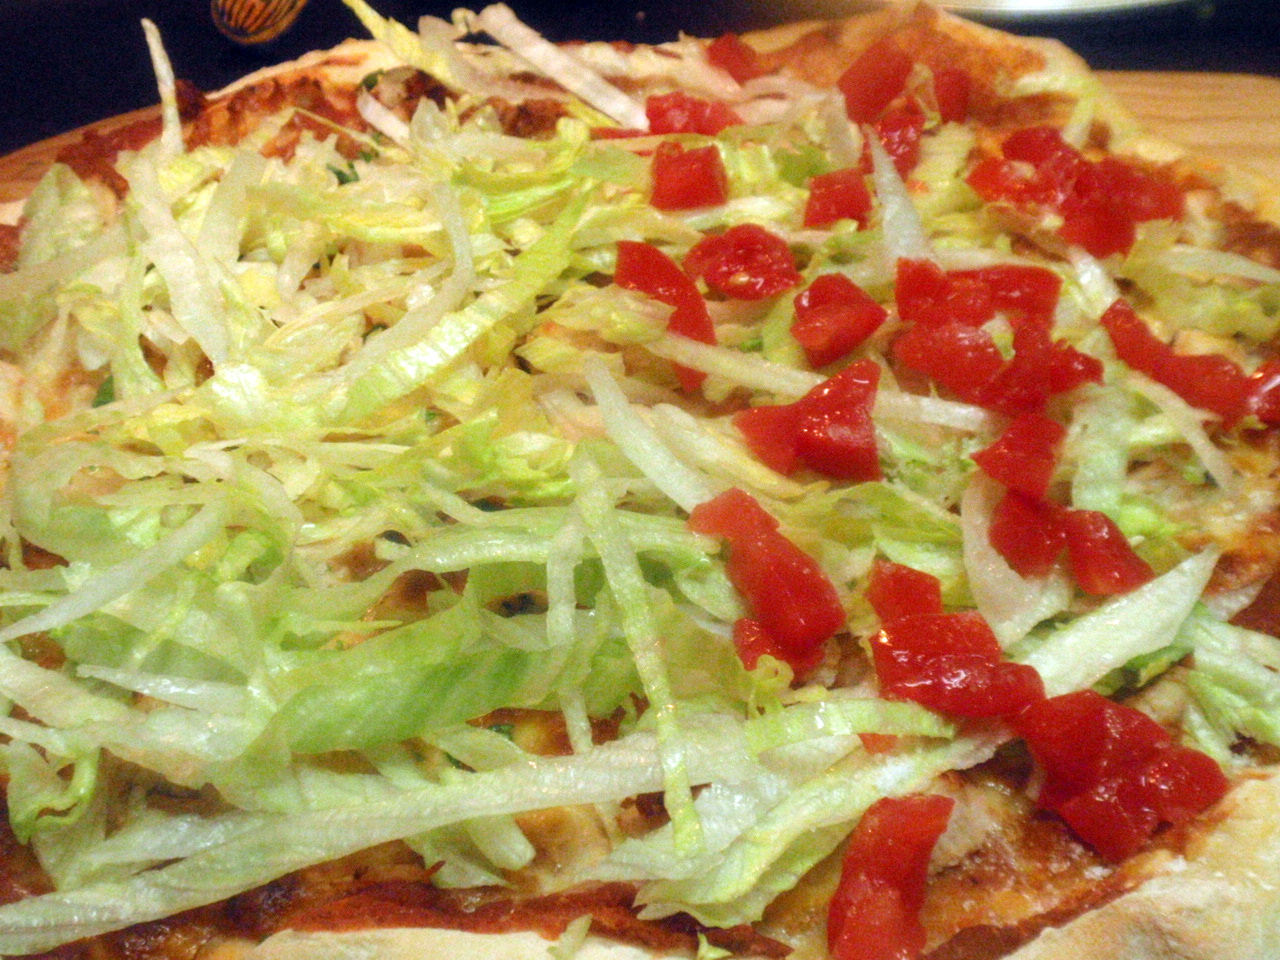 then fresh, cold shredded lettuce over top of the pizza, and fresh diced tomatoes on Tony's side